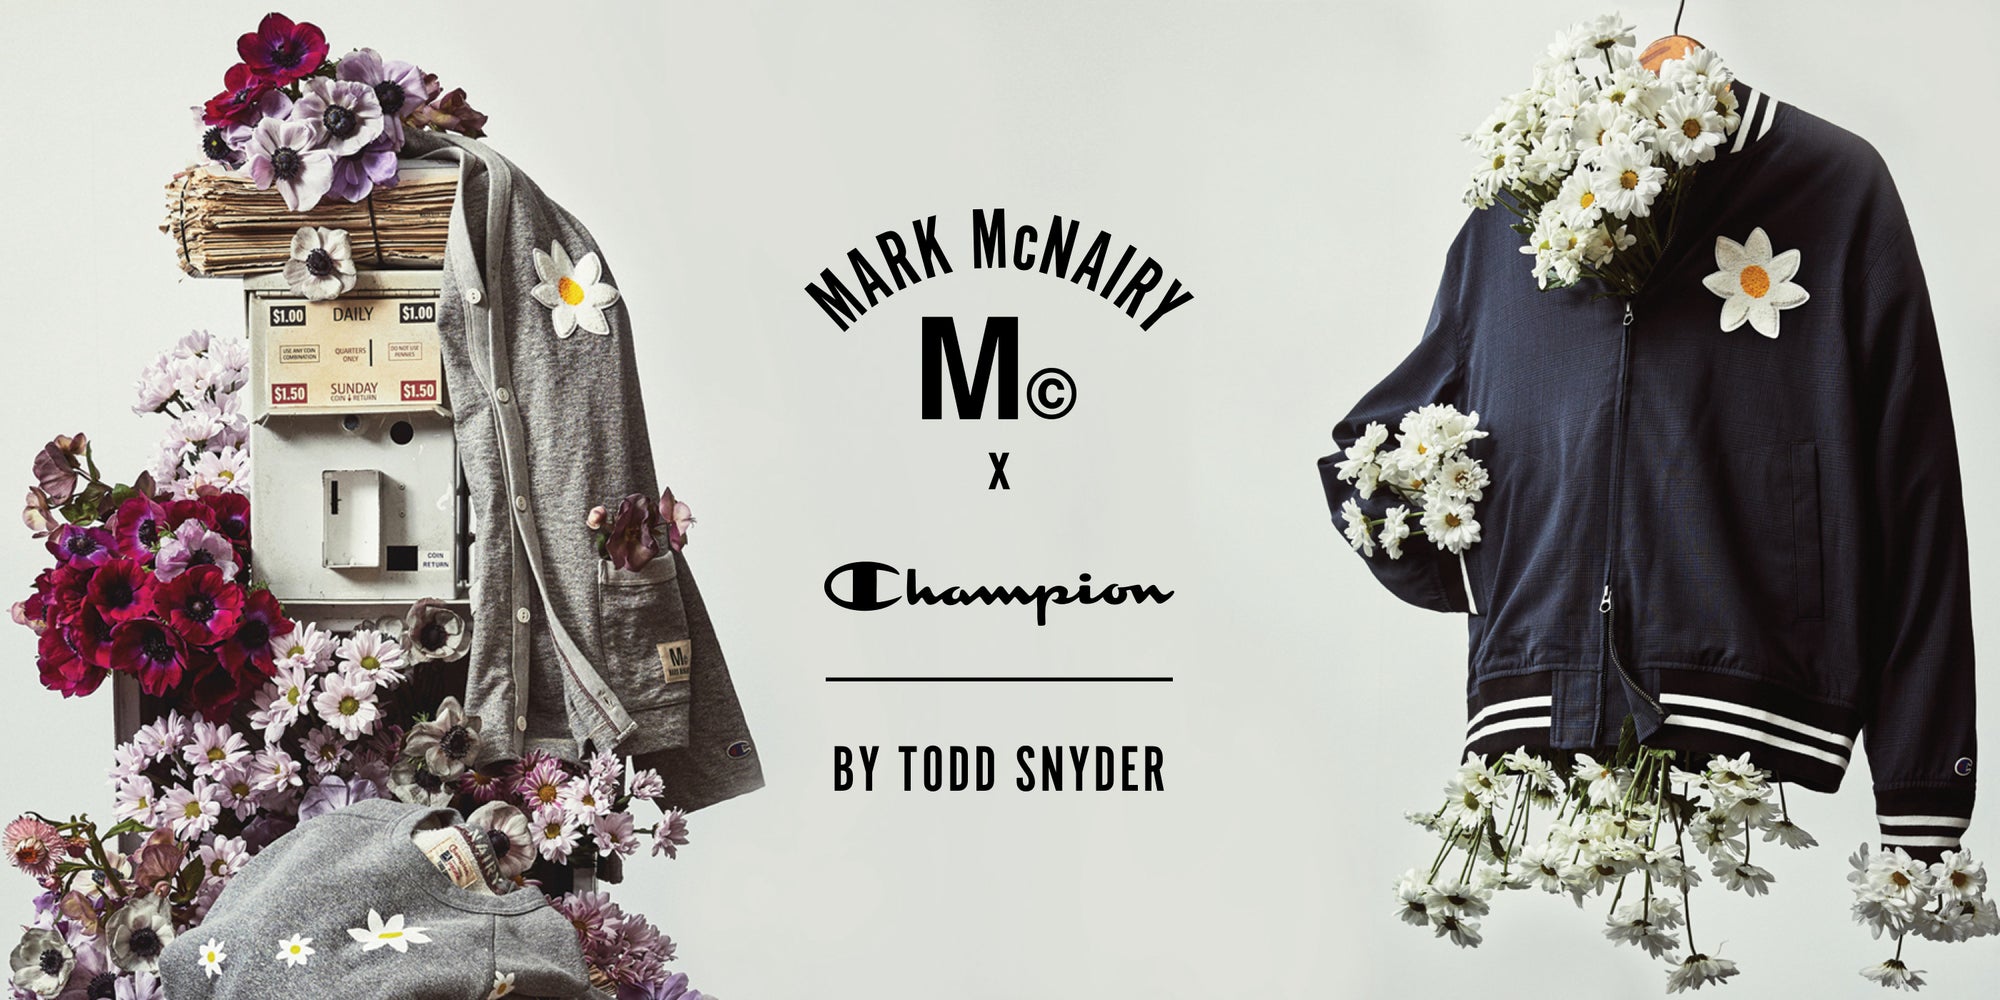 Mark McNairy x Champion by Todd Snyder